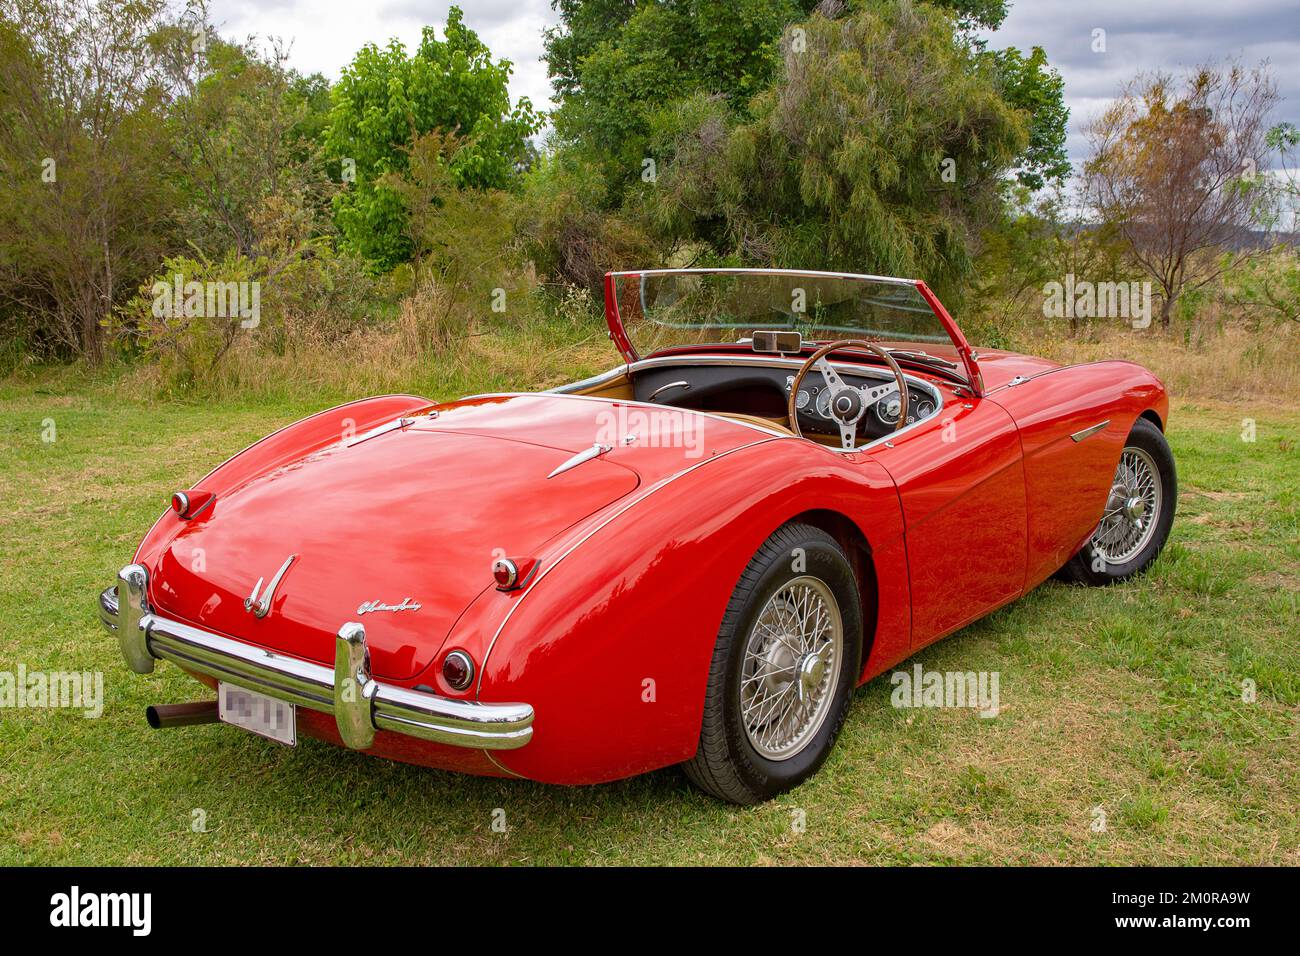 A red 1952 Austin Healy 100 roadster. Stock Photo